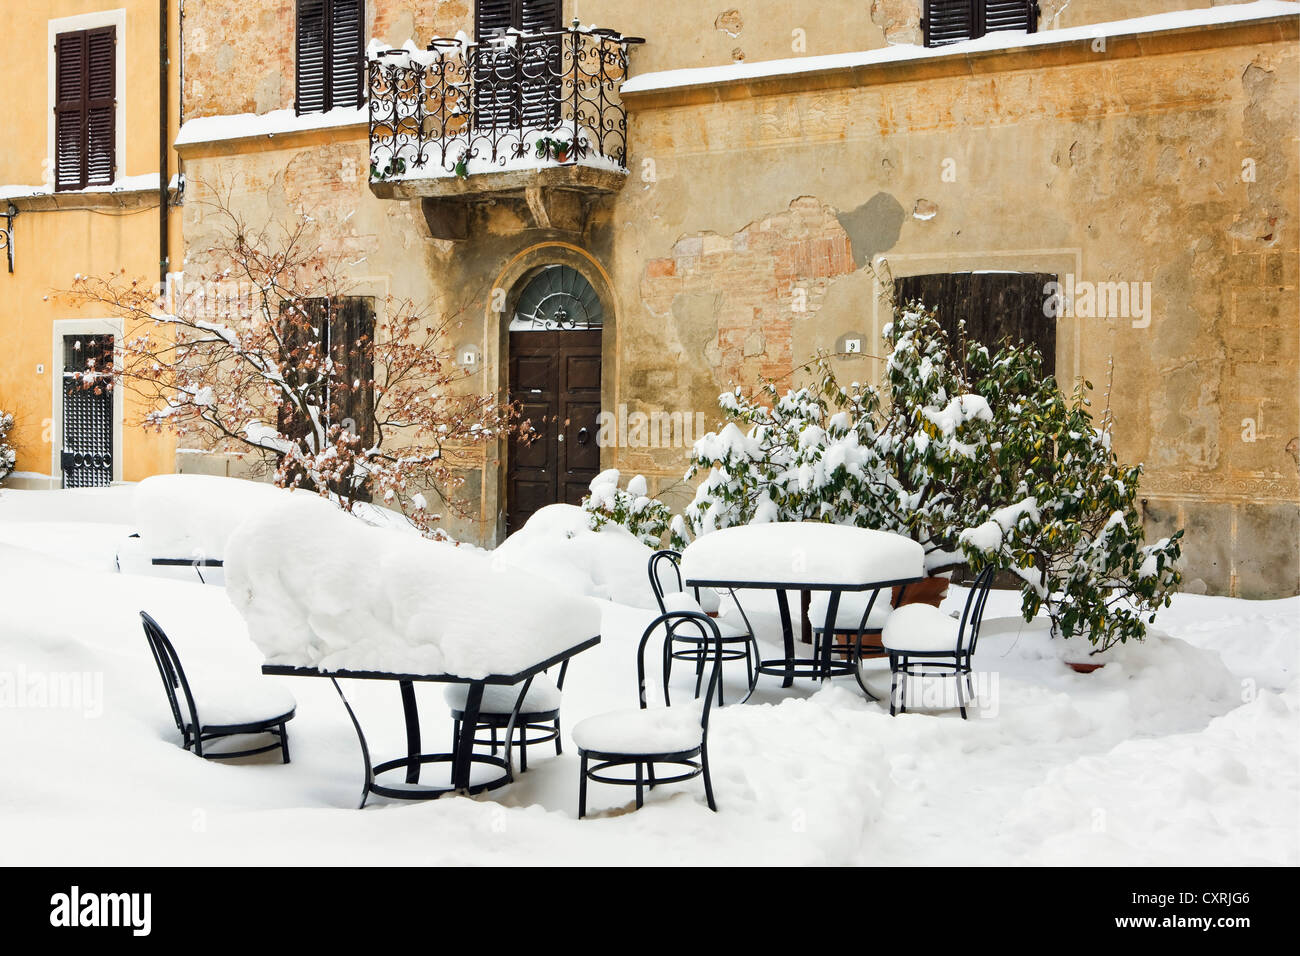 Snow-covered square in Pienza, Tuscany, Italy, Europe Stock Photo